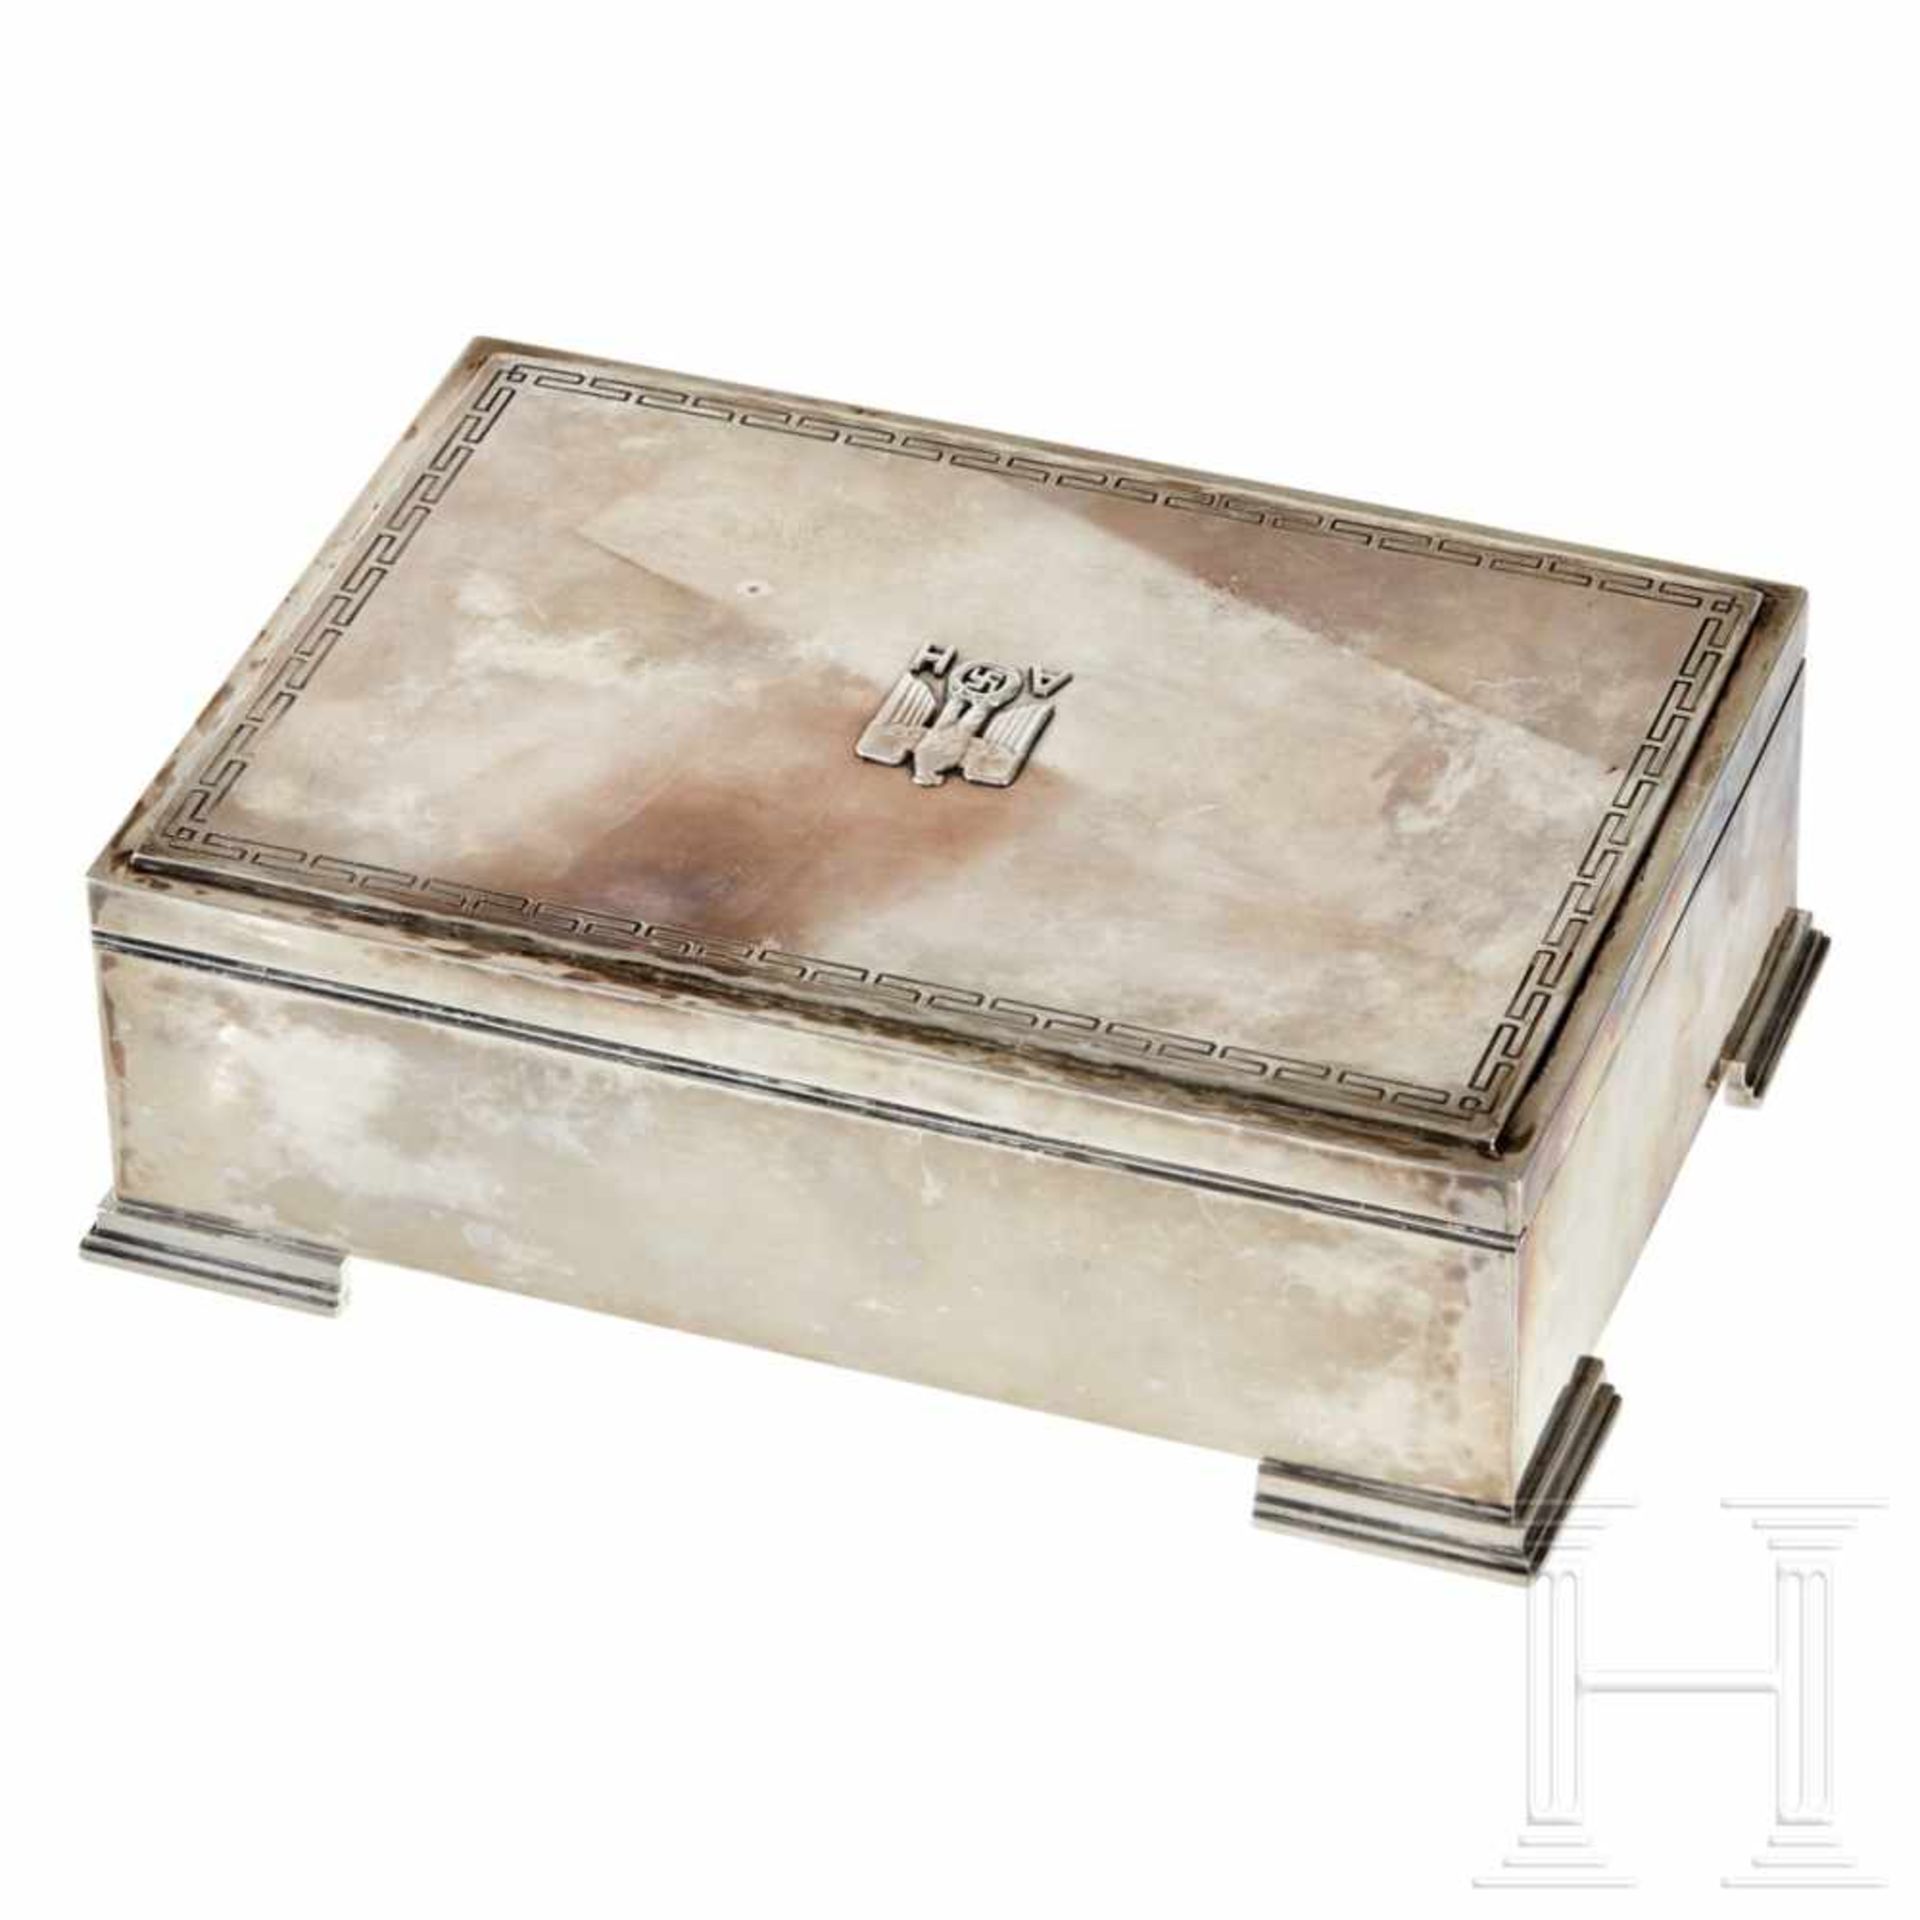 Adolf Hitler – a Cigar Box from his Personal Silver ServiceSilver with highly polished surfaces, a - Bild 2 aus 6